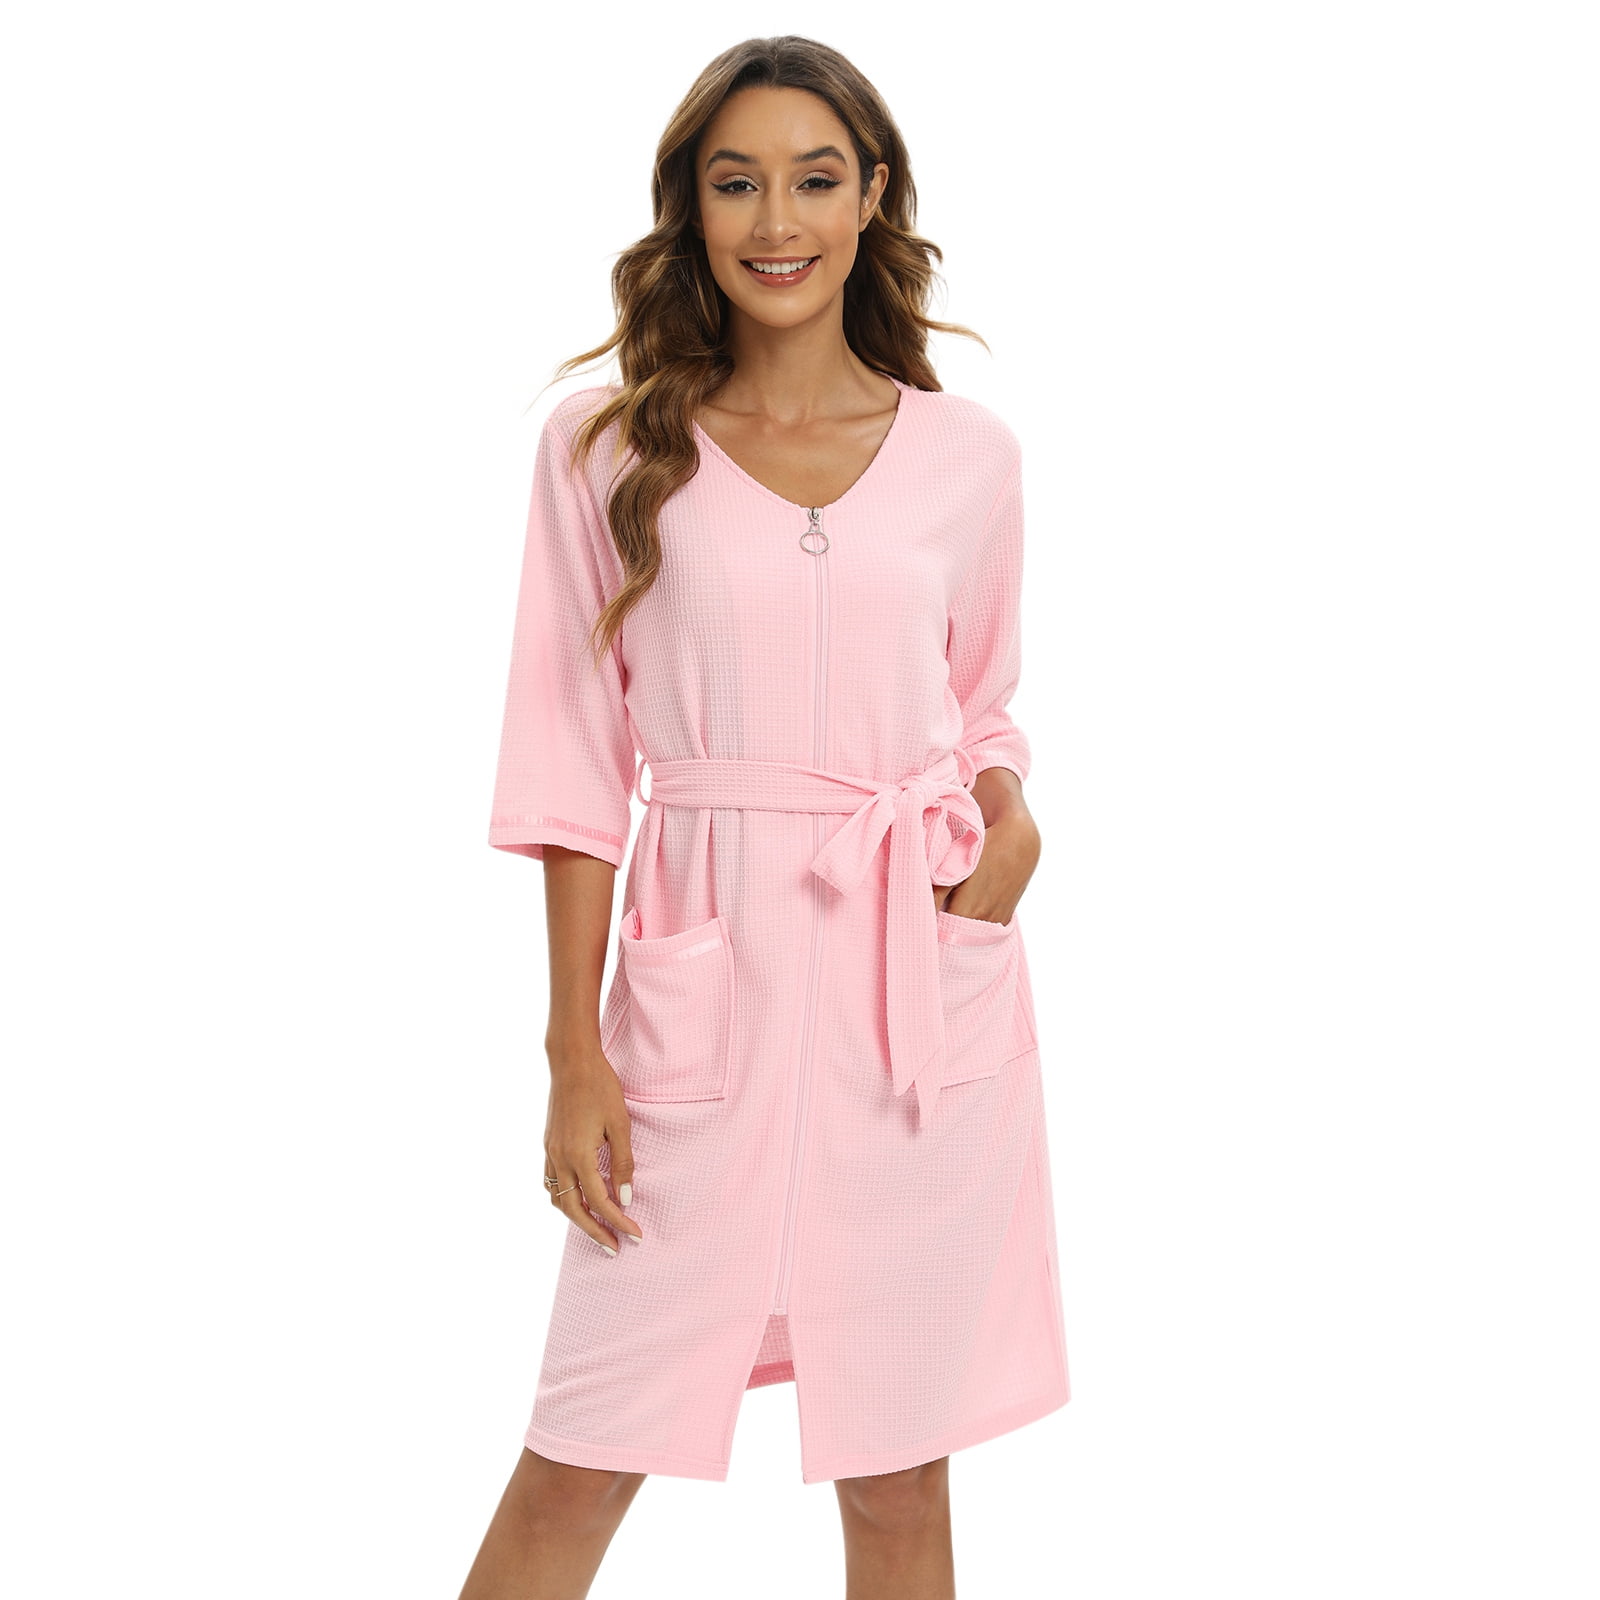 IUEG Zip Up Dressing Gown Terry Towelling Bath Robes For Women 100% Cotton Dressing  Gown Drying in Mint Blue Pink colour (8-10, Grey) : Amazon.co.uk: Fashion